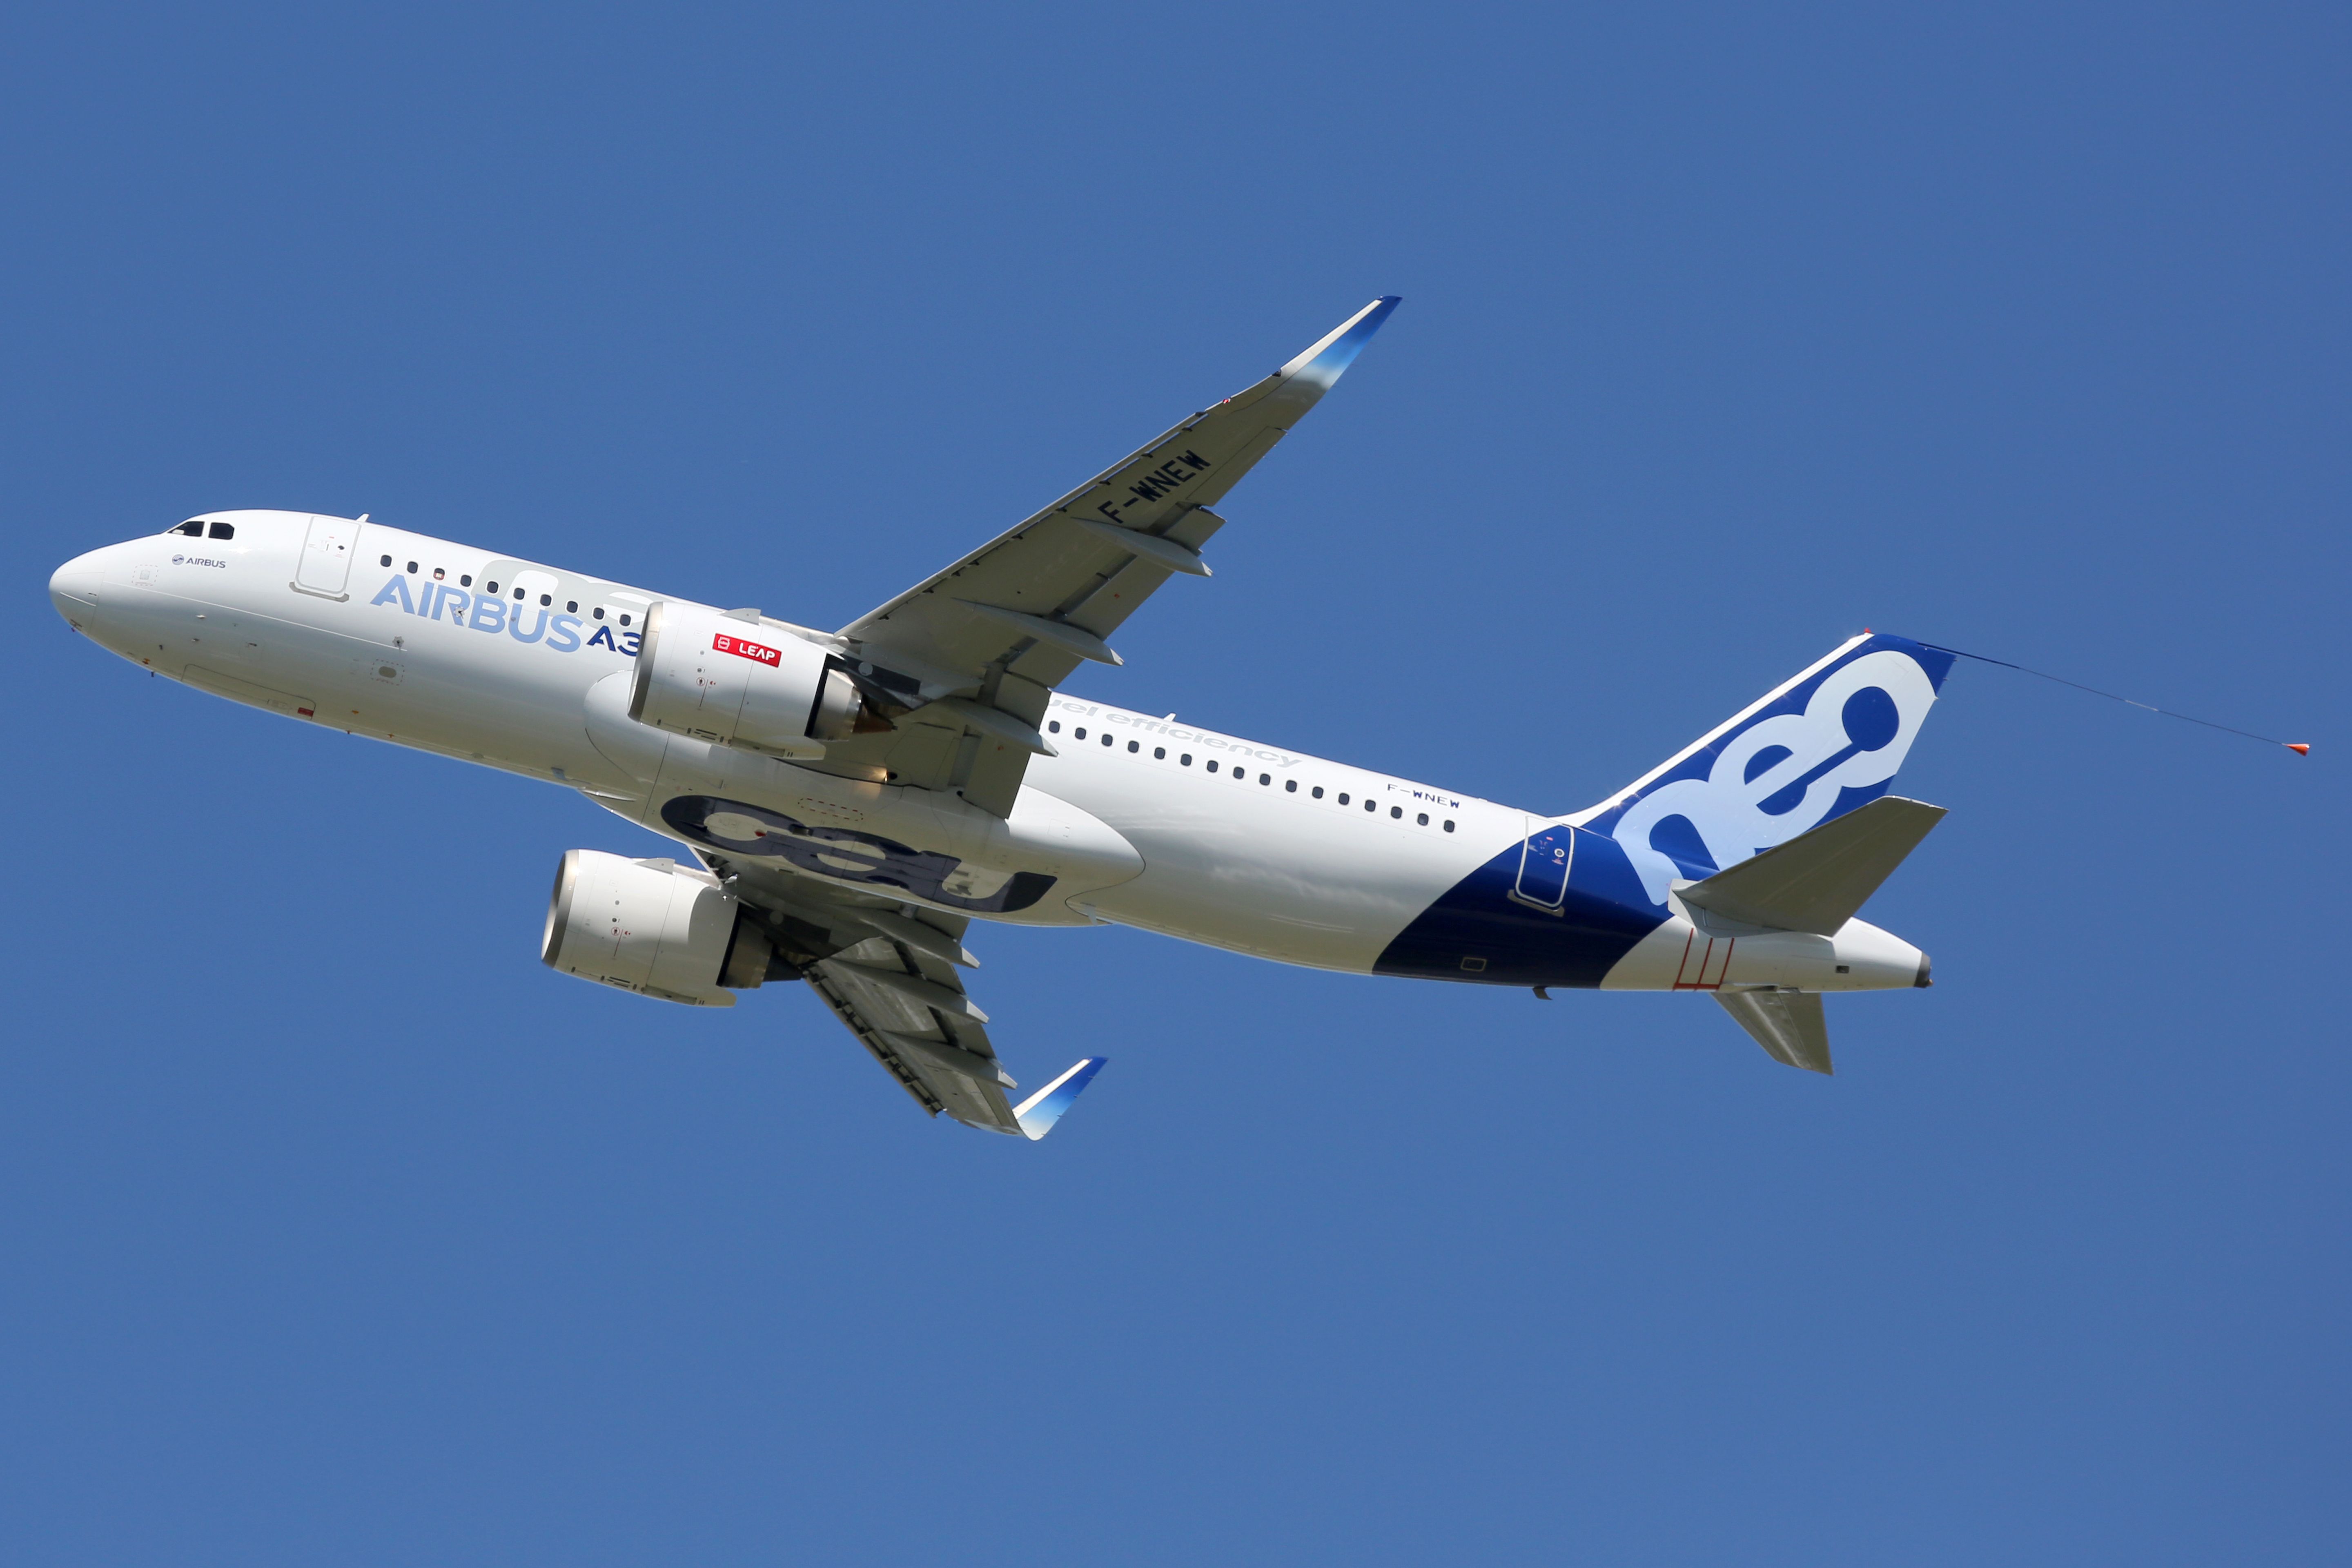 An Airbus A320 in house livery flying in the sky.